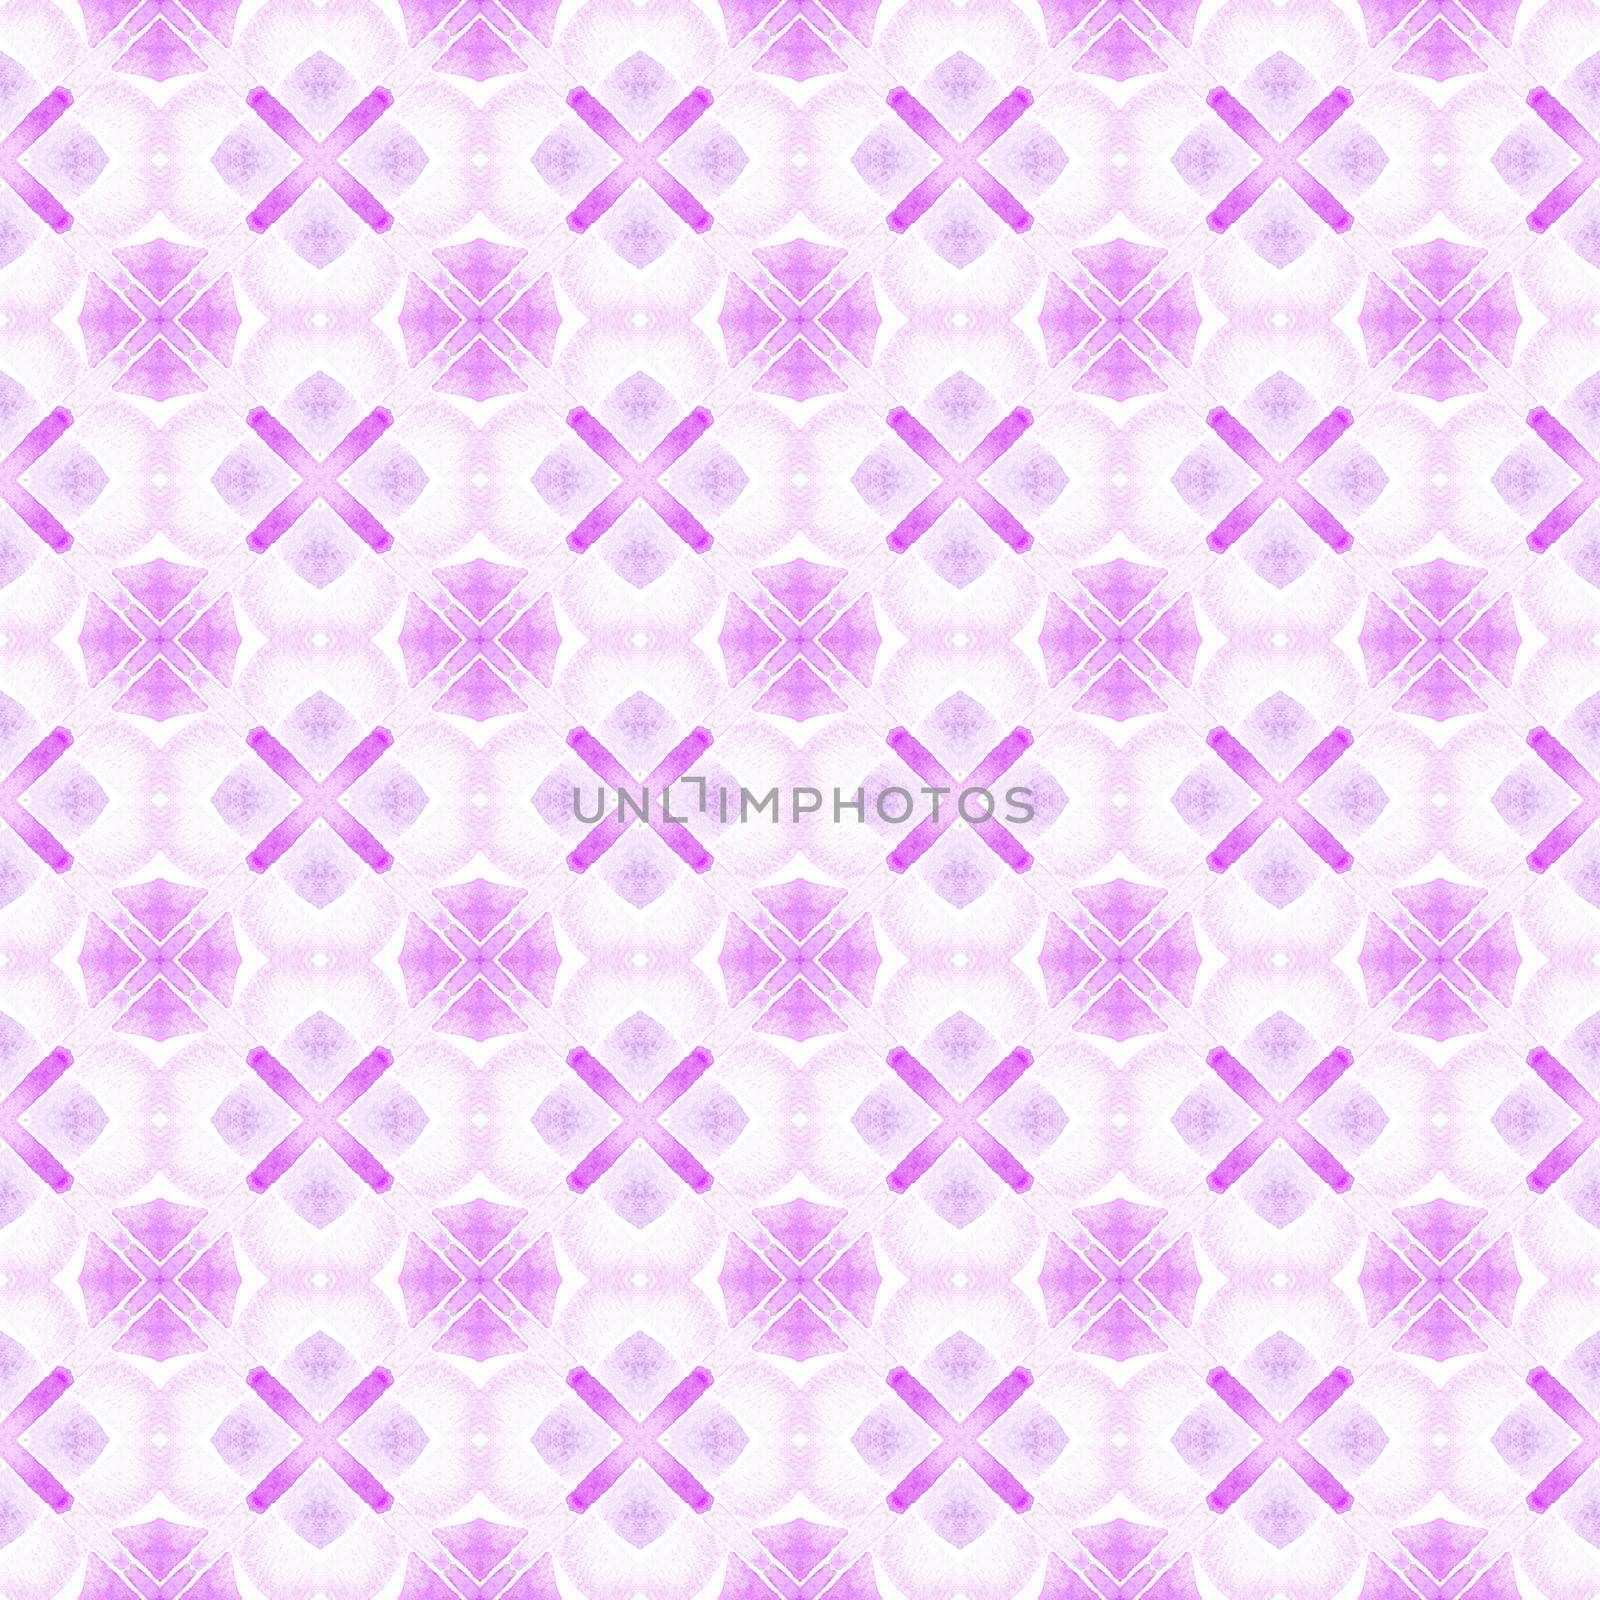 Textile ready terrific print, swimwear fabric, wallpaper, wrapping. Purple lively boho chic summer design. Hand painted tiled watercolor border. Tiled watercolor background.